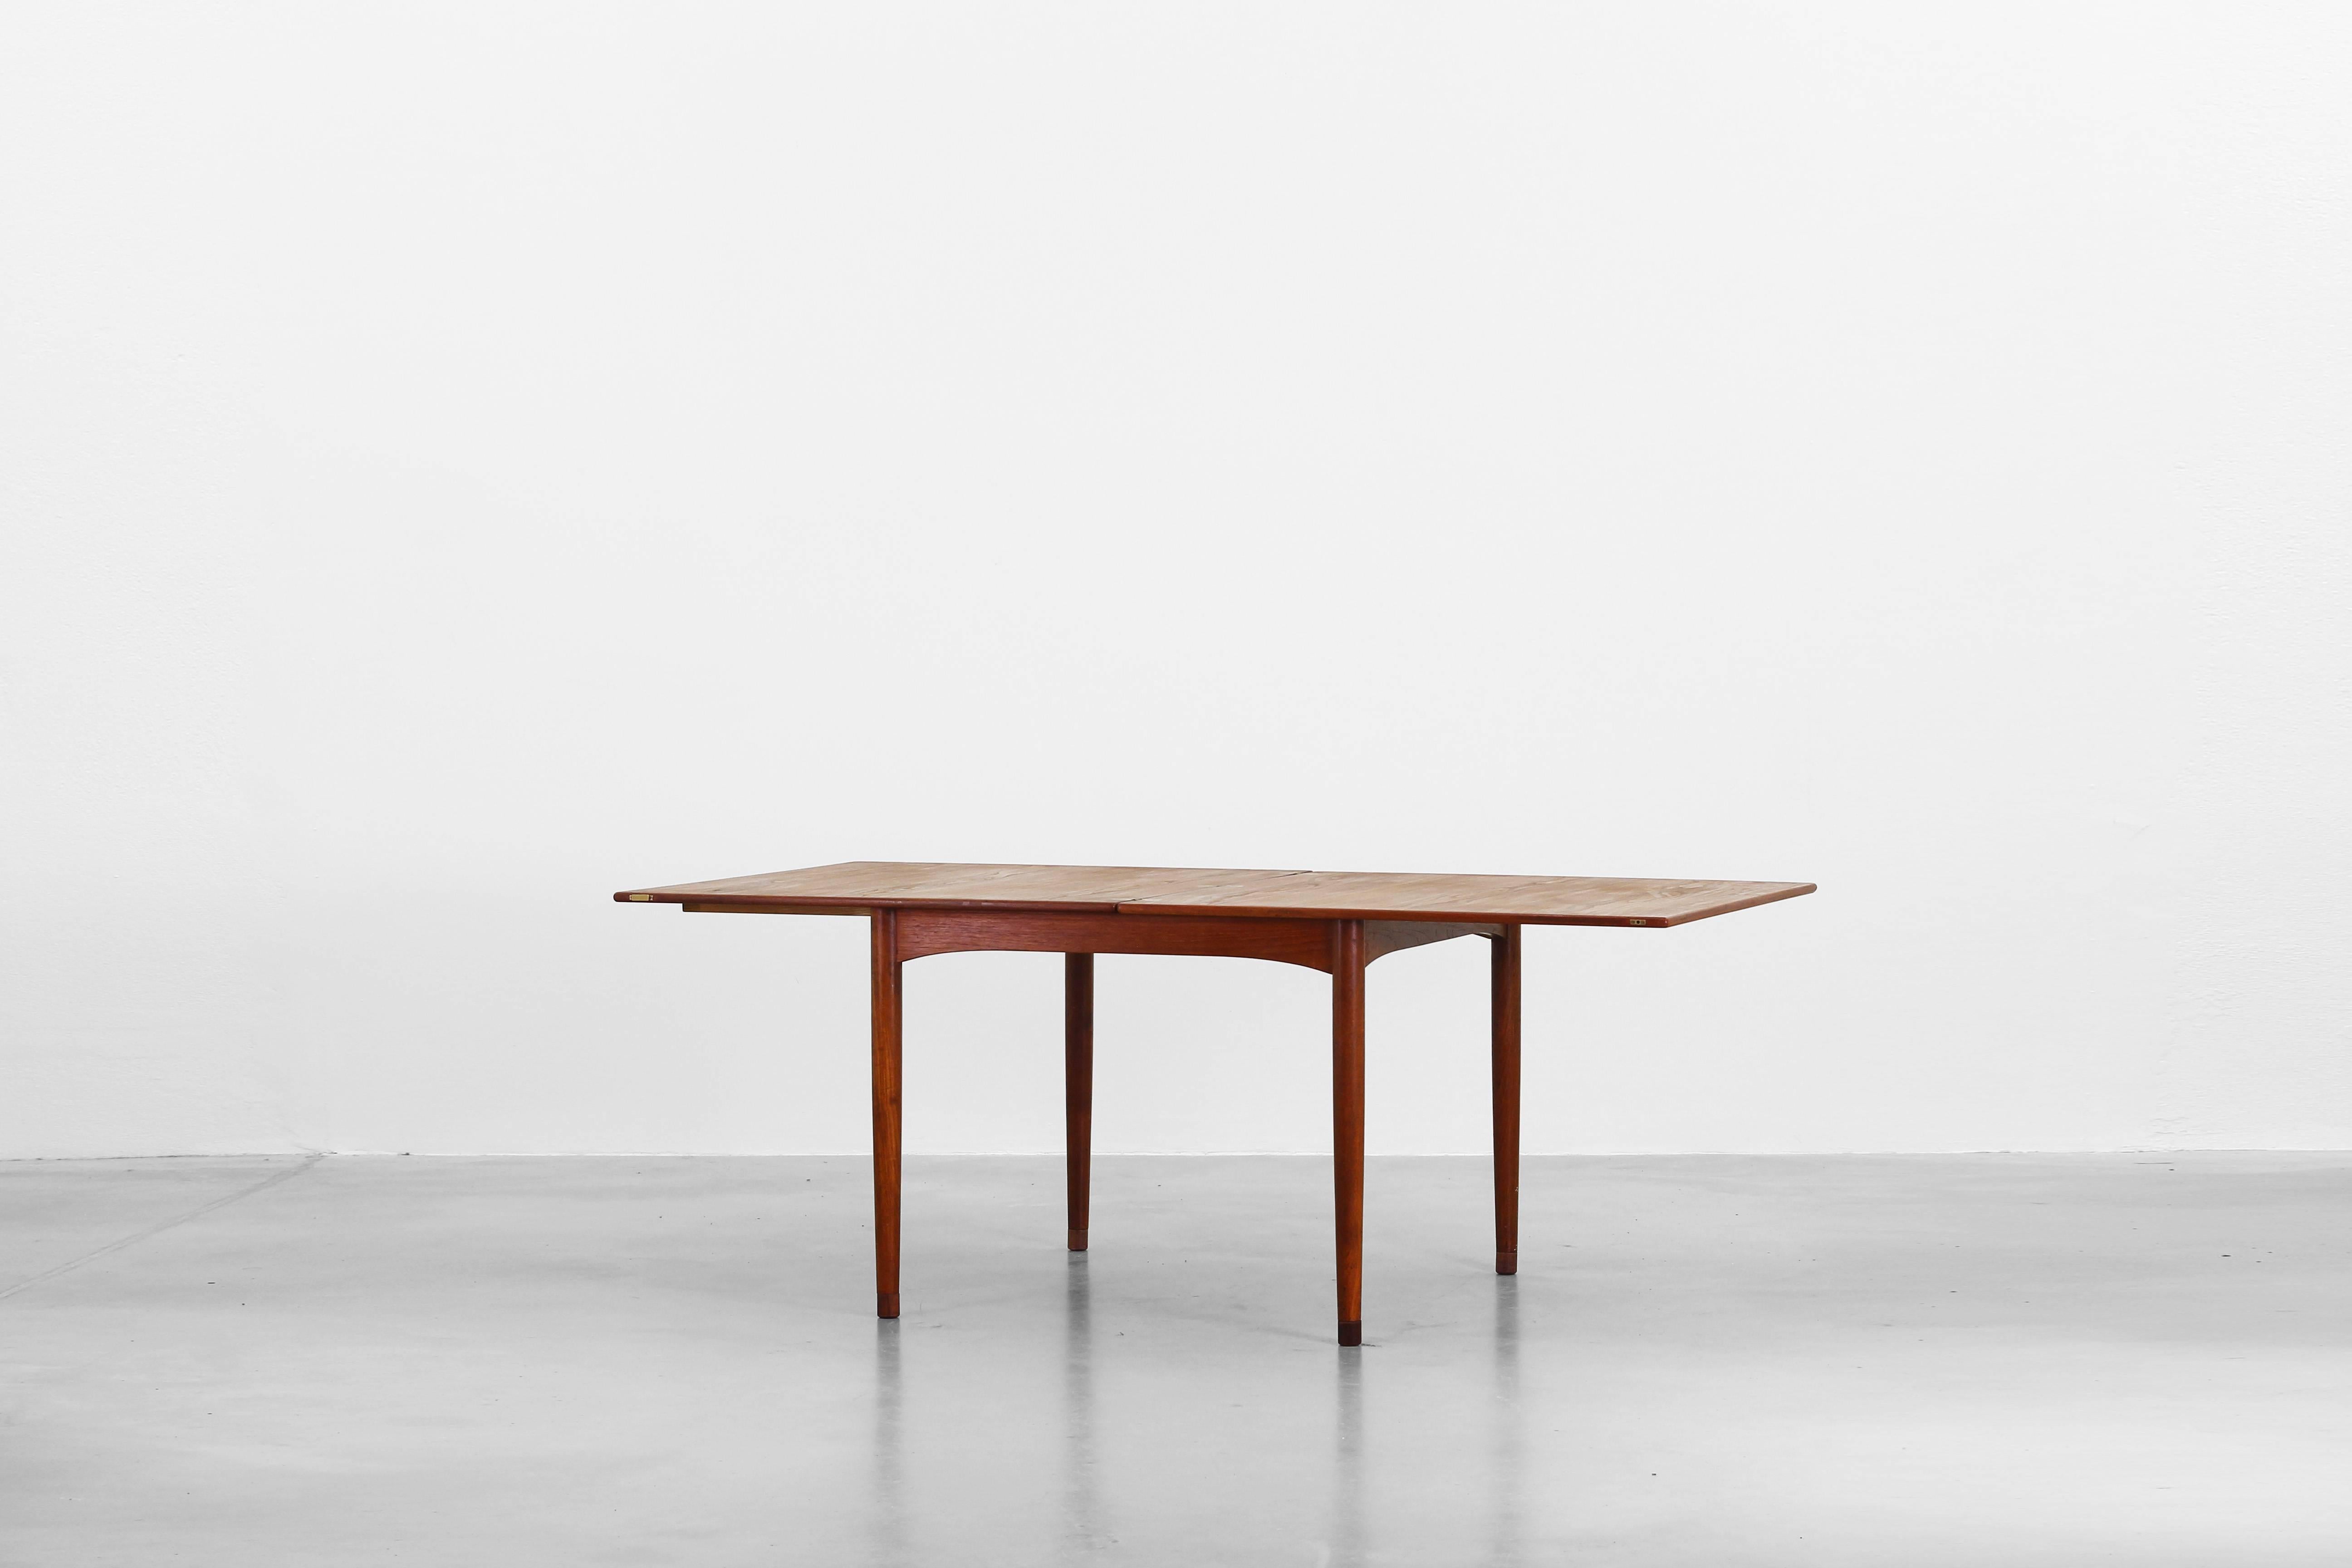 Rare dining expandable table with flip-top by Borge Mogensen for Soborg Mobelfabrik. Very good condition with little signs of use. Designed in the 1950s, made in Denmark.